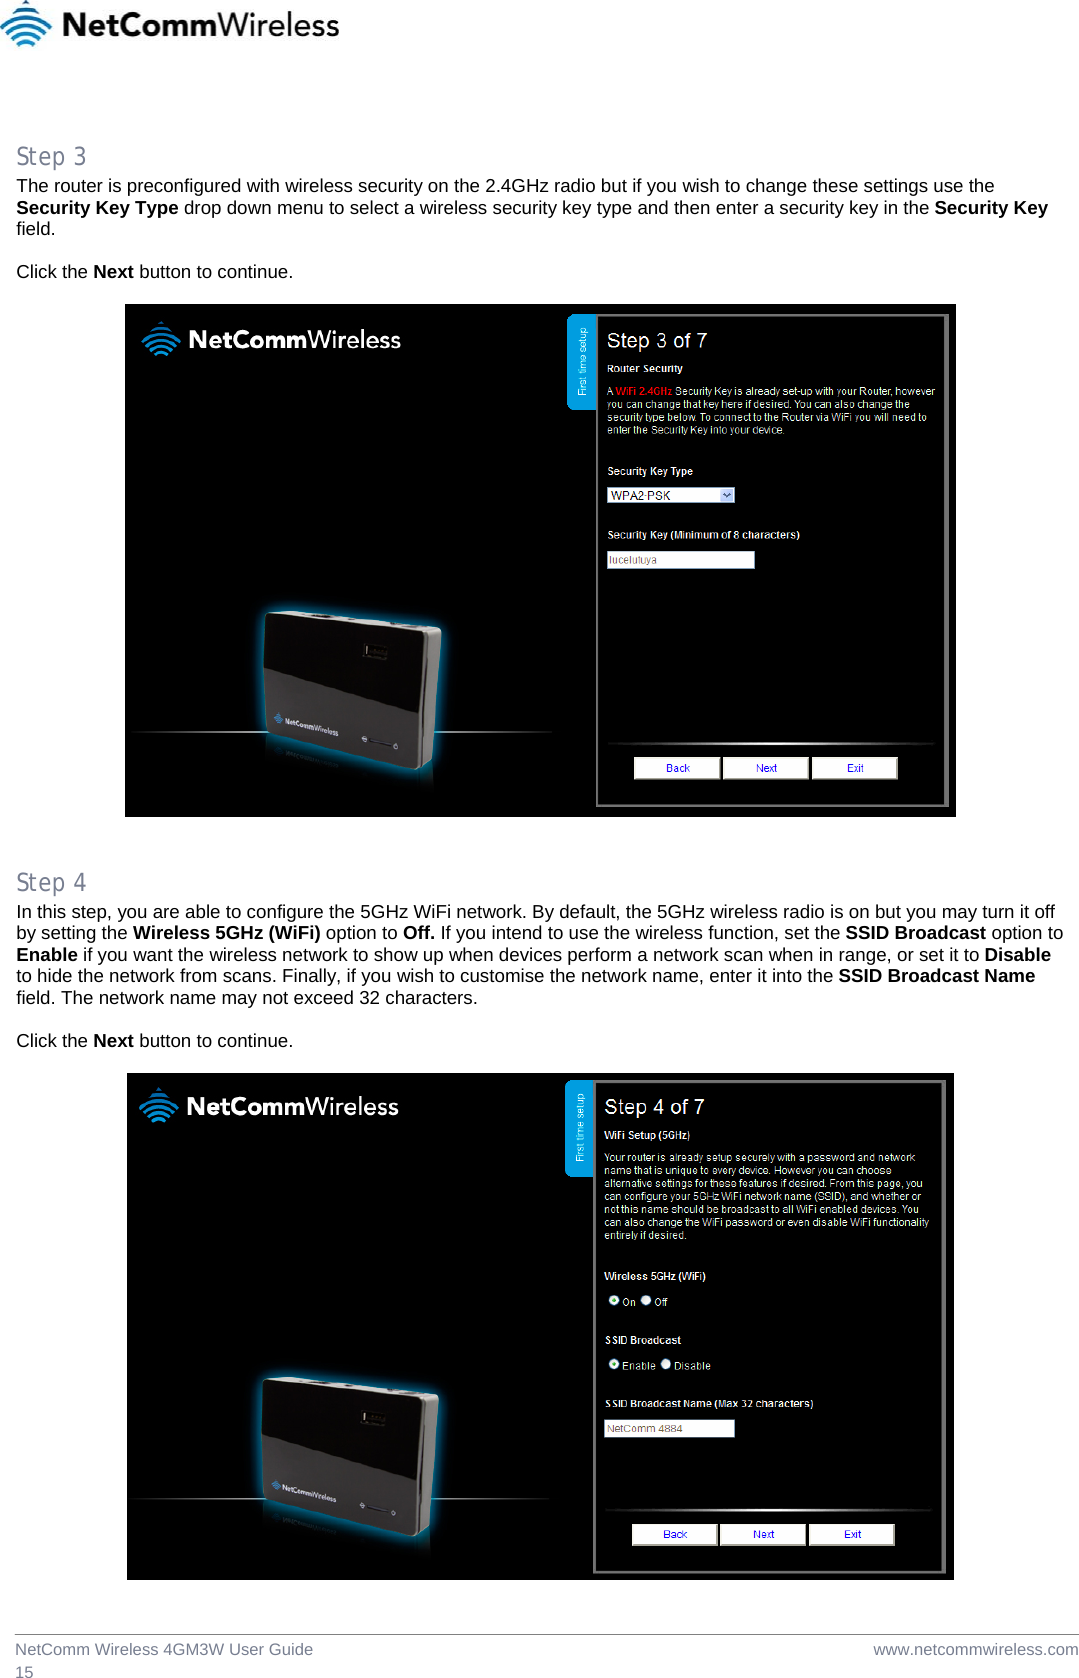  www.netcommwireless.comNetComm Wireless 4GM3W User Guide 15  Step 3 The router is preconfigured with wireless security on the 2.4GHz radio but if you wish to change these settings use the Security Key Type drop down menu to select a wireless security key type and then enter a security key in the Security Key field.  Click the Next button to continue.     Step 4 In this step, you are able to configure the 5GHz WiFi network. By default, the 5GHz wireless radio is on but you may turn it off by setting the Wireless 5GHz (WiFi) option to Off. If you intend to use the wireless function, set the SSID Broadcast option to Enable if you want the wireless network to show up when devices perform a network scan when in range, or set it to Disable to hide the network from scans. Finally, if you wish to customise the network name, enter it into the SSID Broadcast Name field. The network name may not exceed 32 characters.  Click the Next button to continue.   